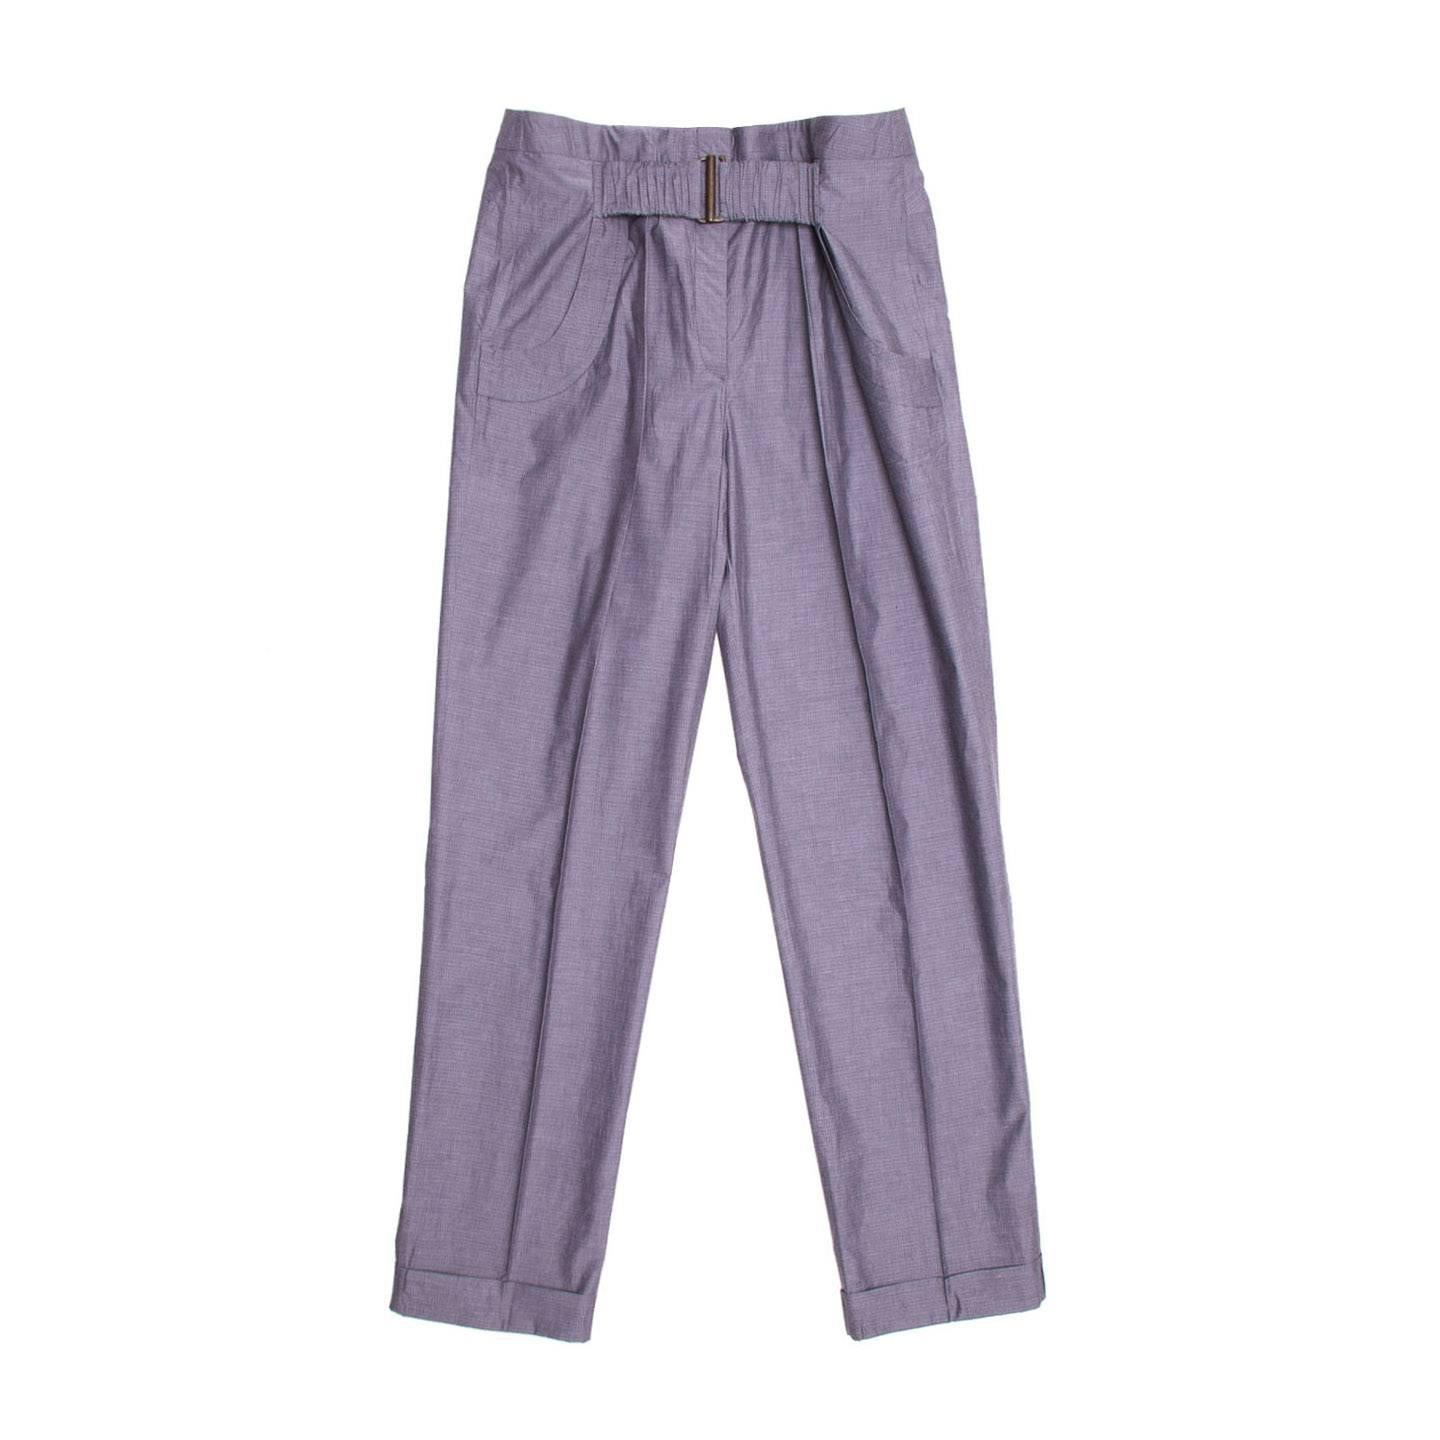 Stella McCartney Grey Check Pleated Pants For Sale